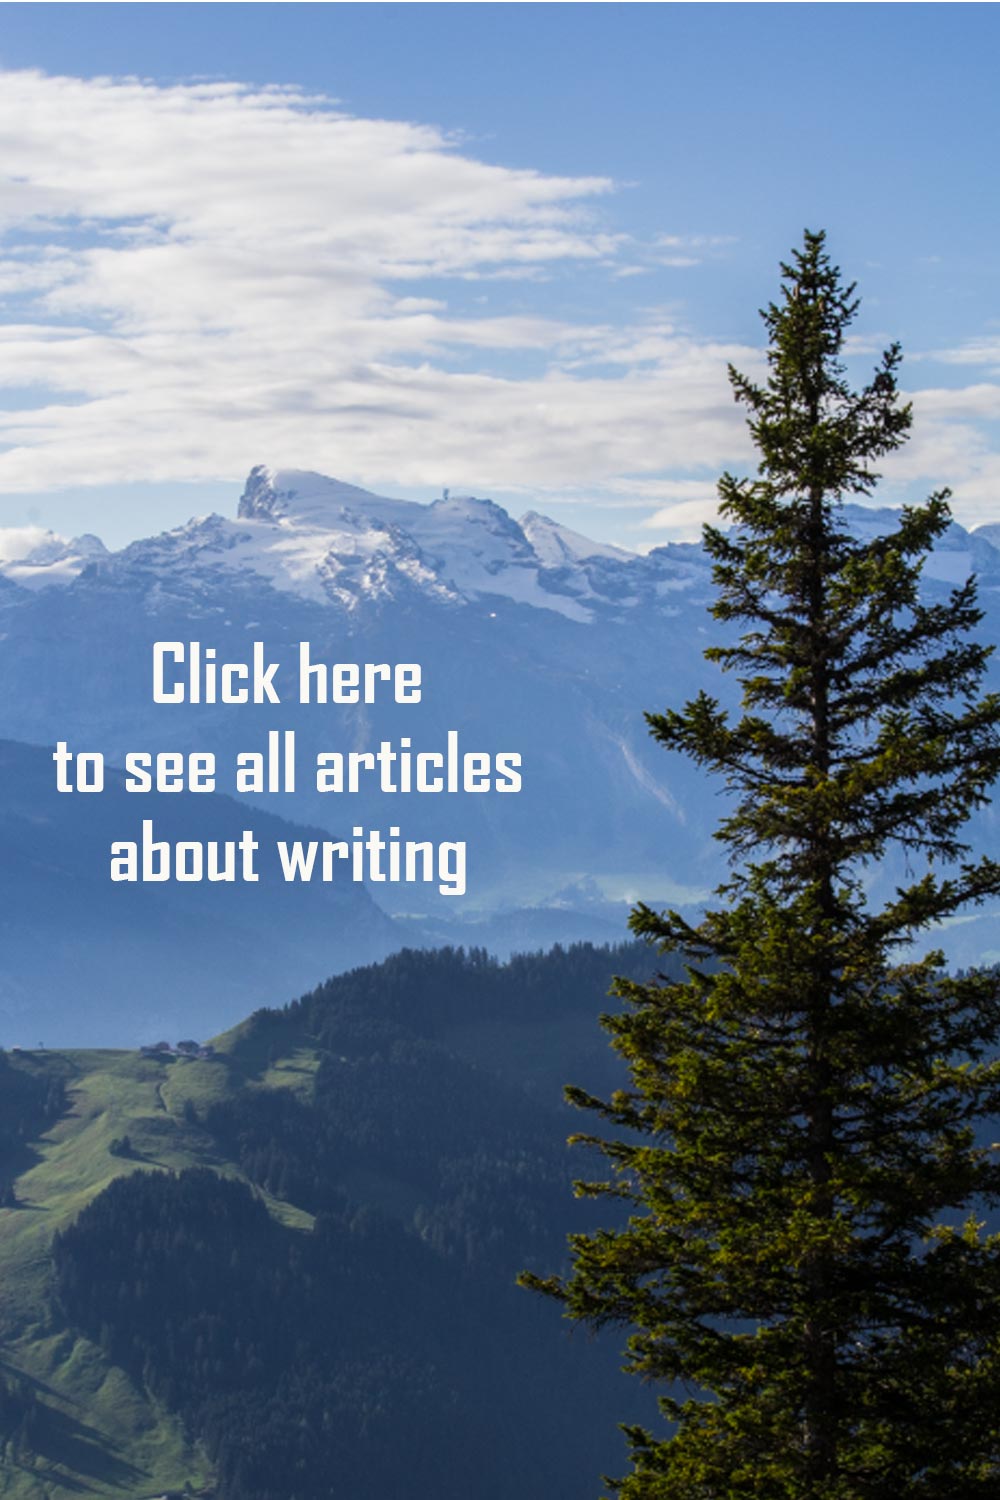 Click image to see all general writing articles